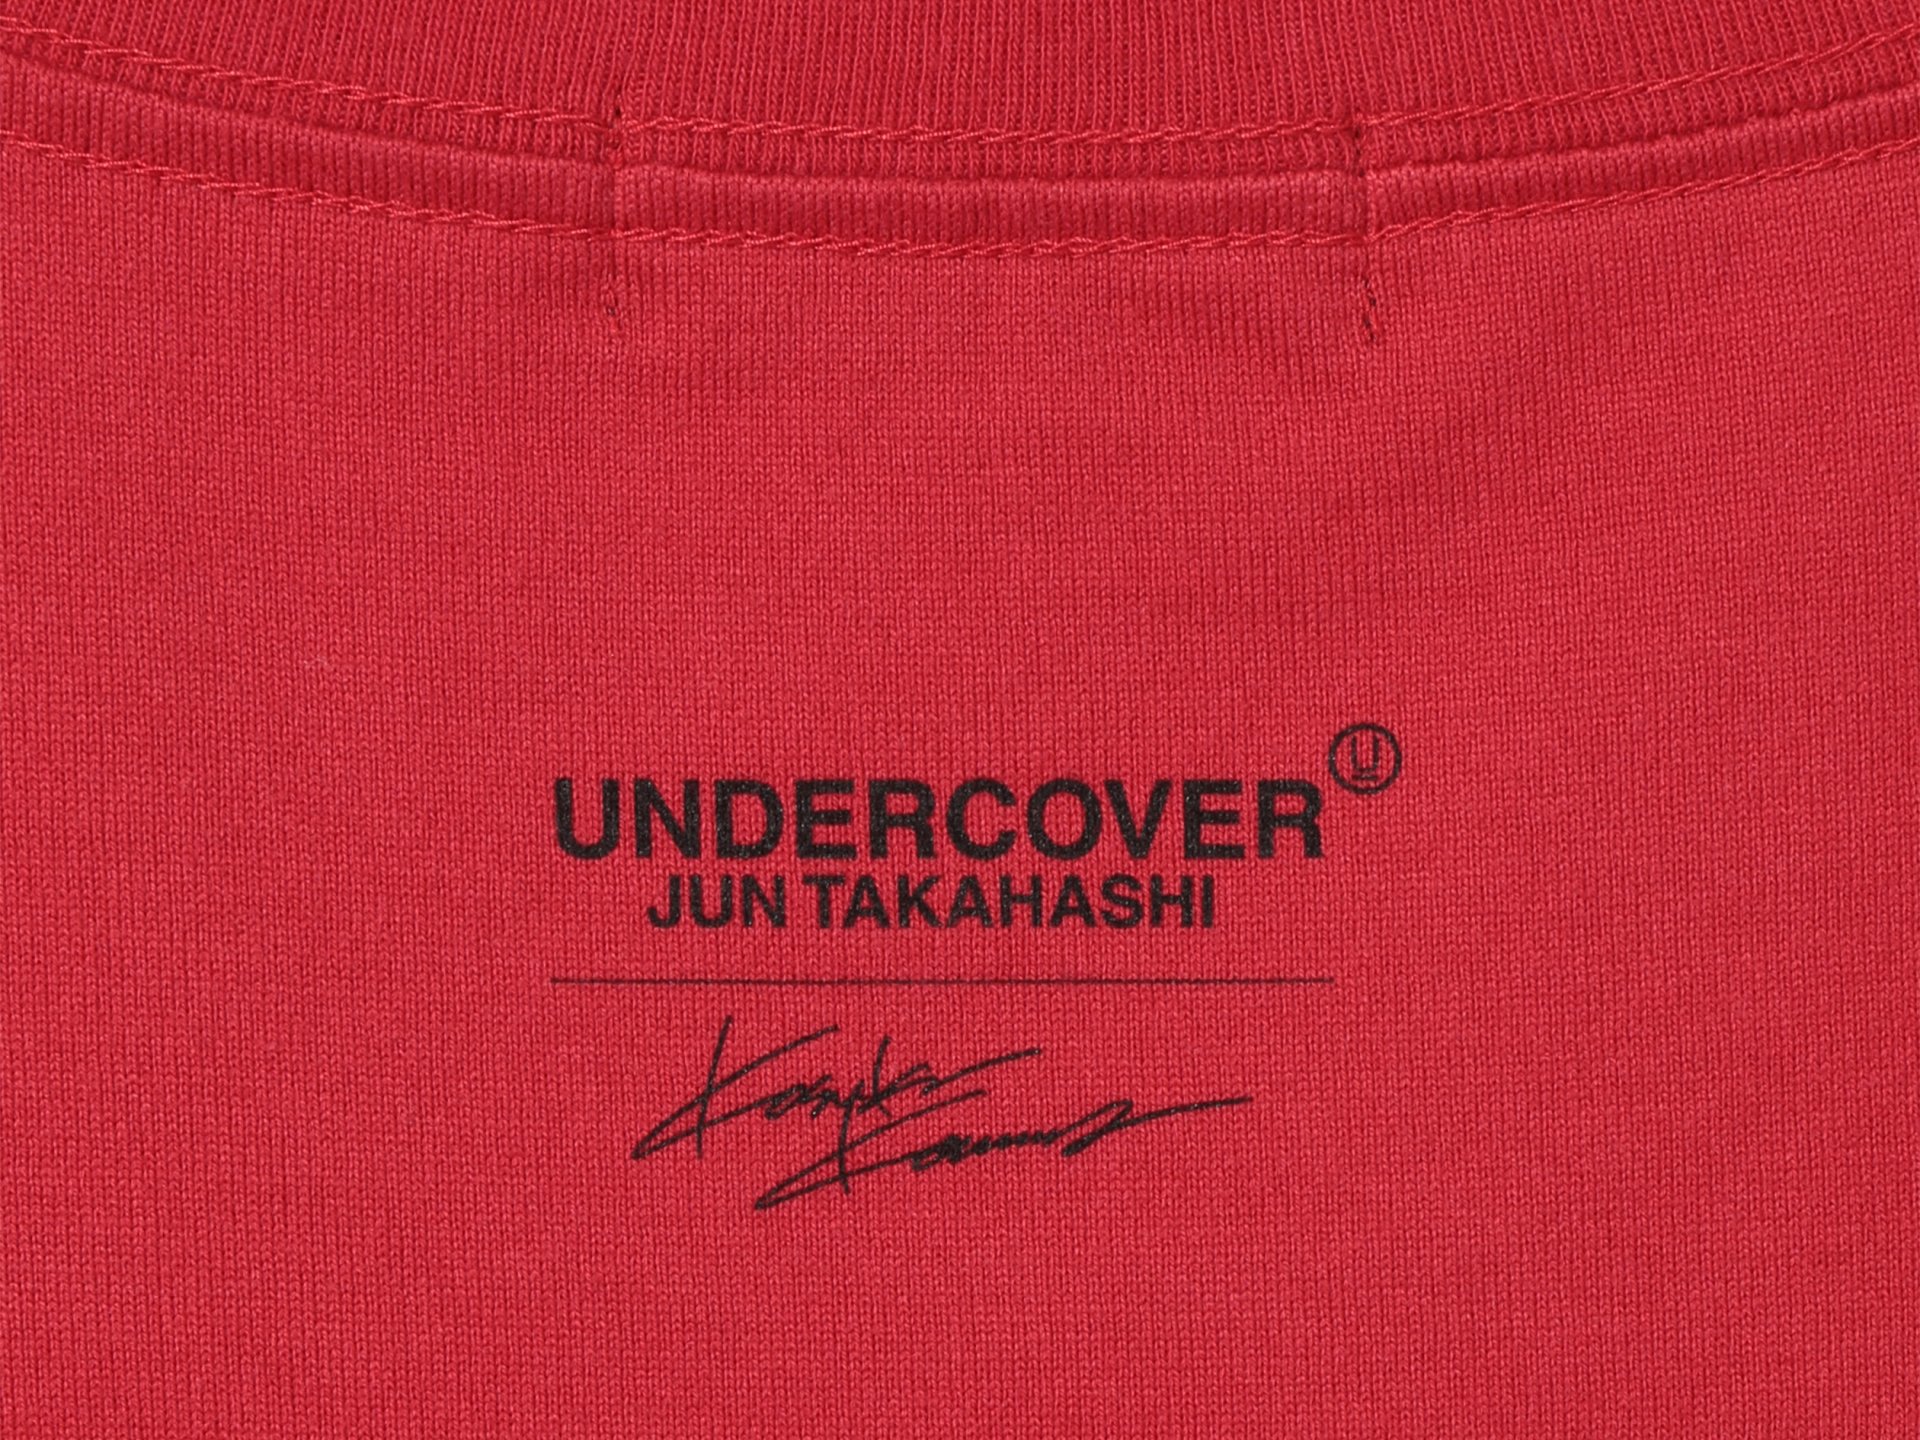 UNDERCOVER UC1C9805 RED - Revolution Web Store